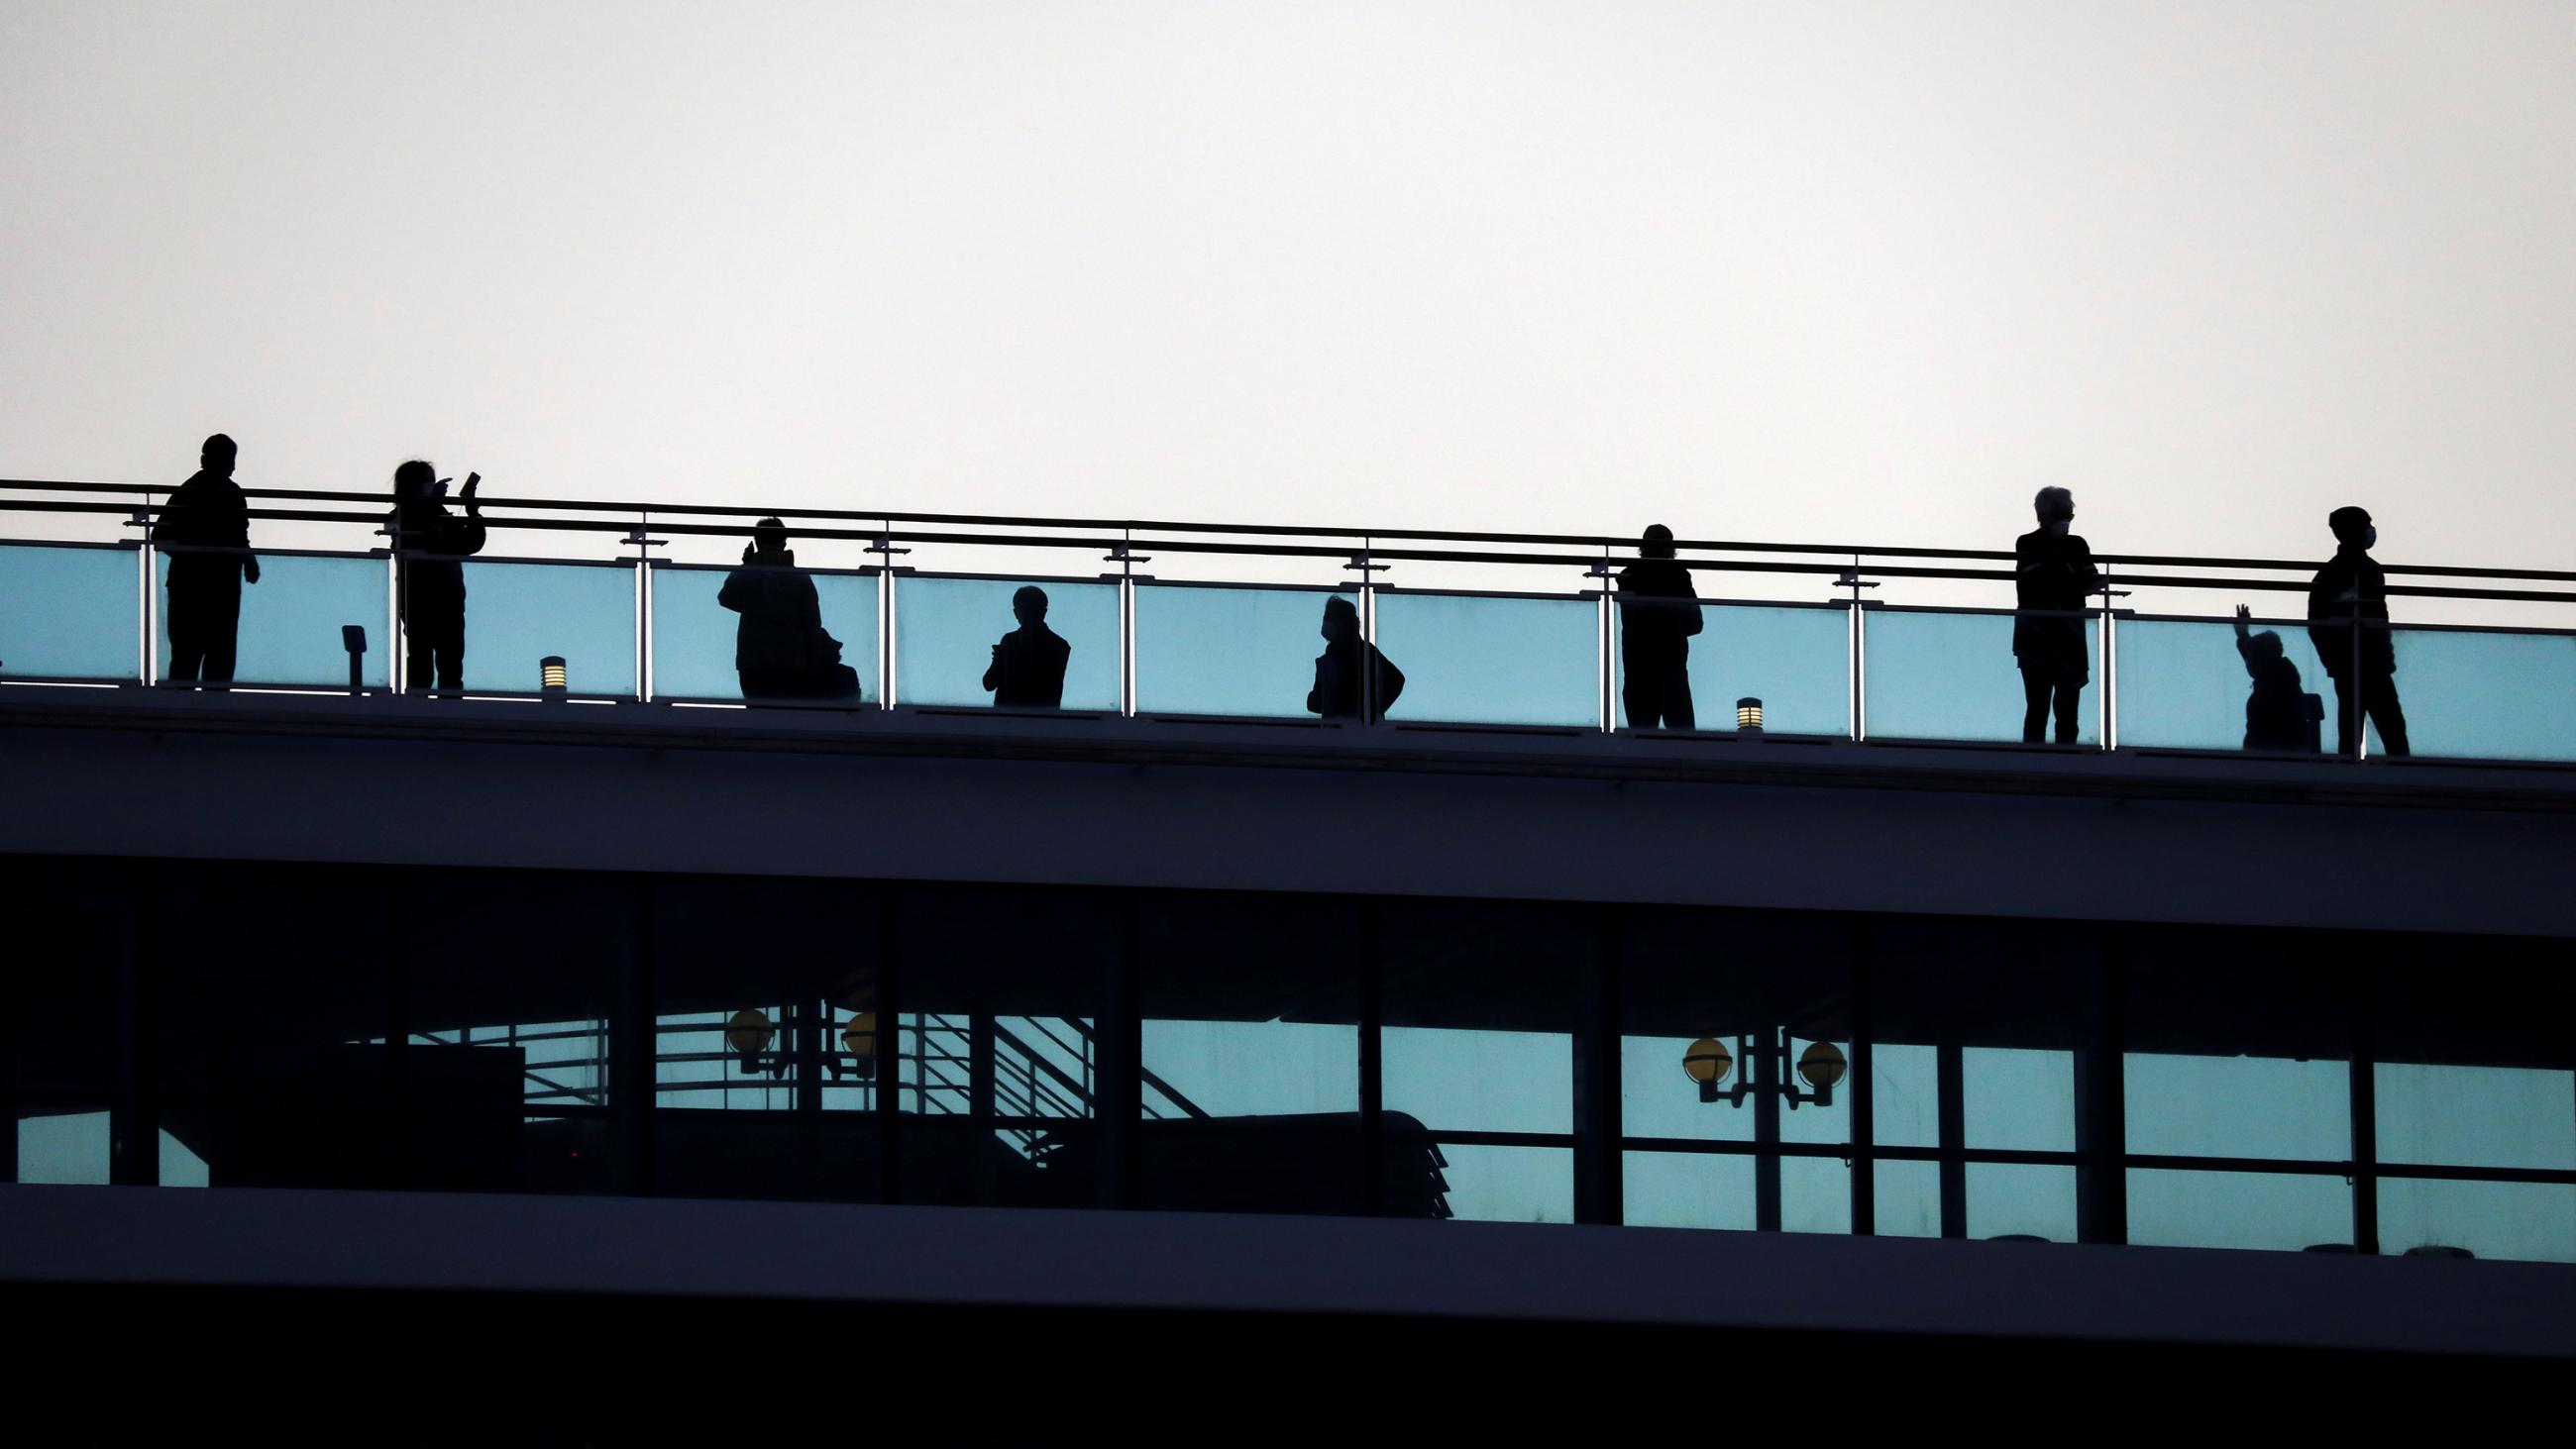 The image shows a couple rows of passengers on two decks, one below the other. They are standing against a bright background and appear as silhouettes. 